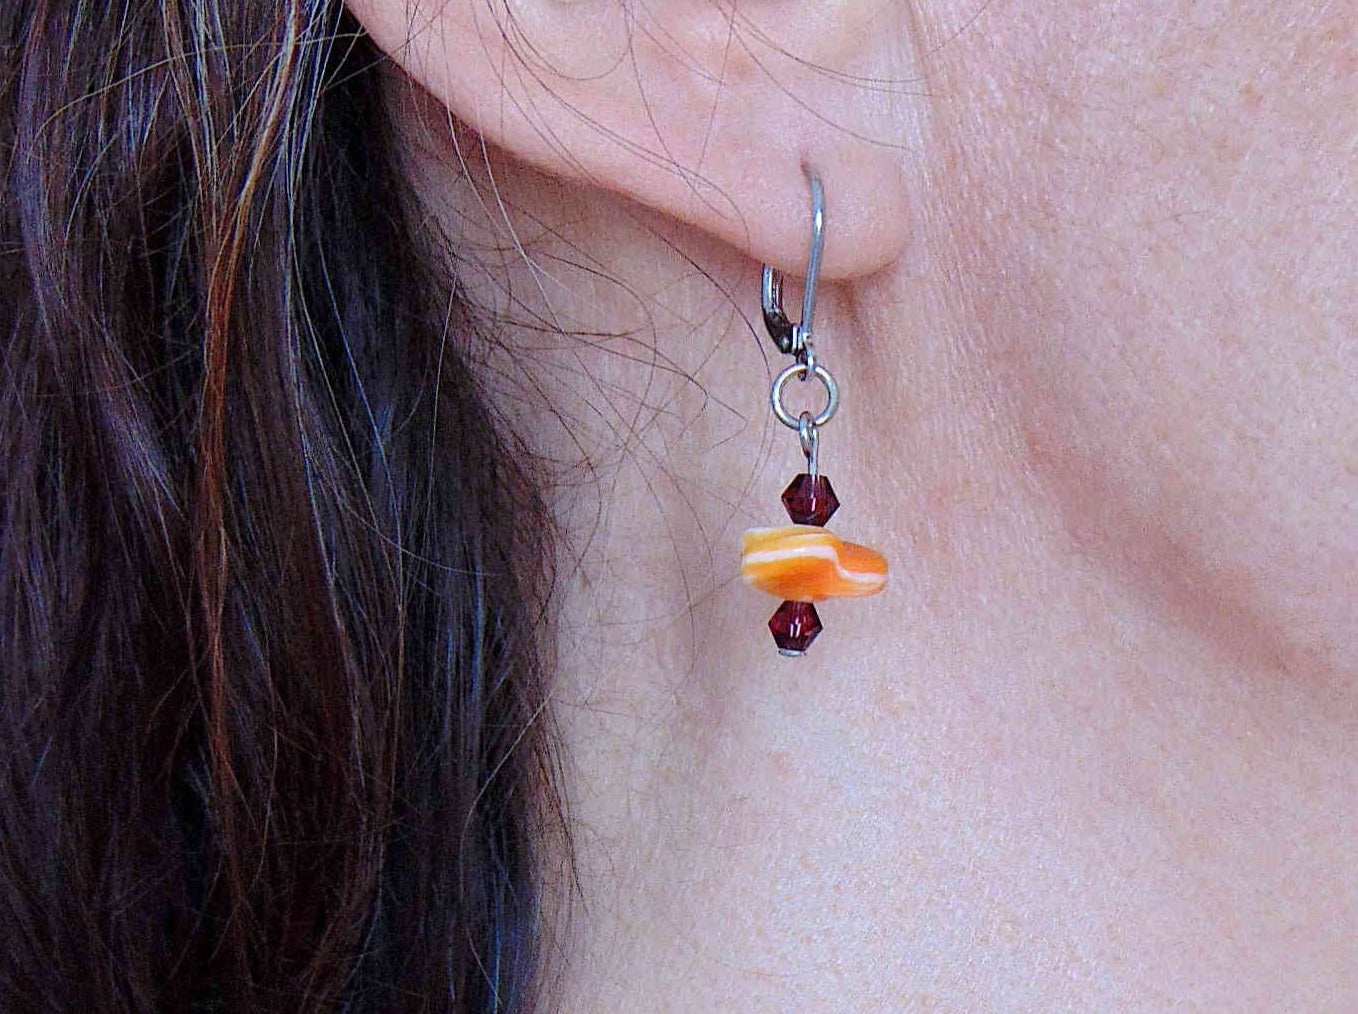 Short earrings with orange and white vintage glass flowers, violet Swarovski crystals, stainless steel lever back hooks